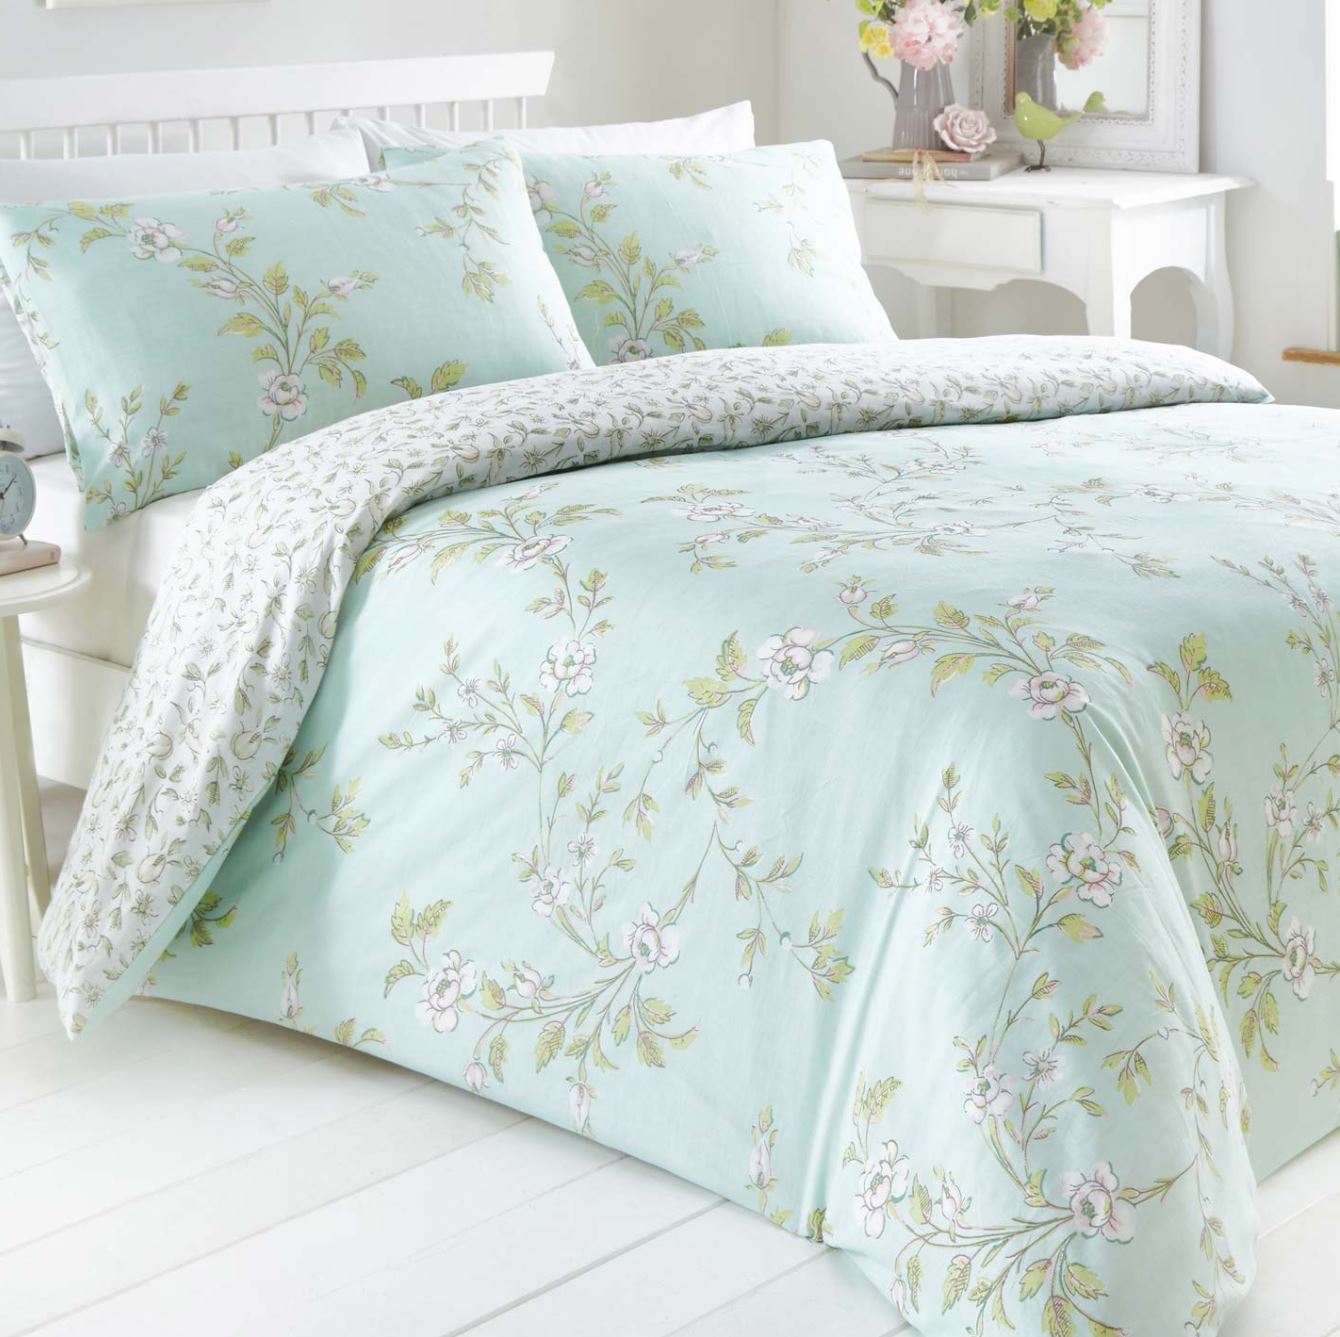 Featuring classic painted flower blossoms in subtle shades of duck egg blue and green